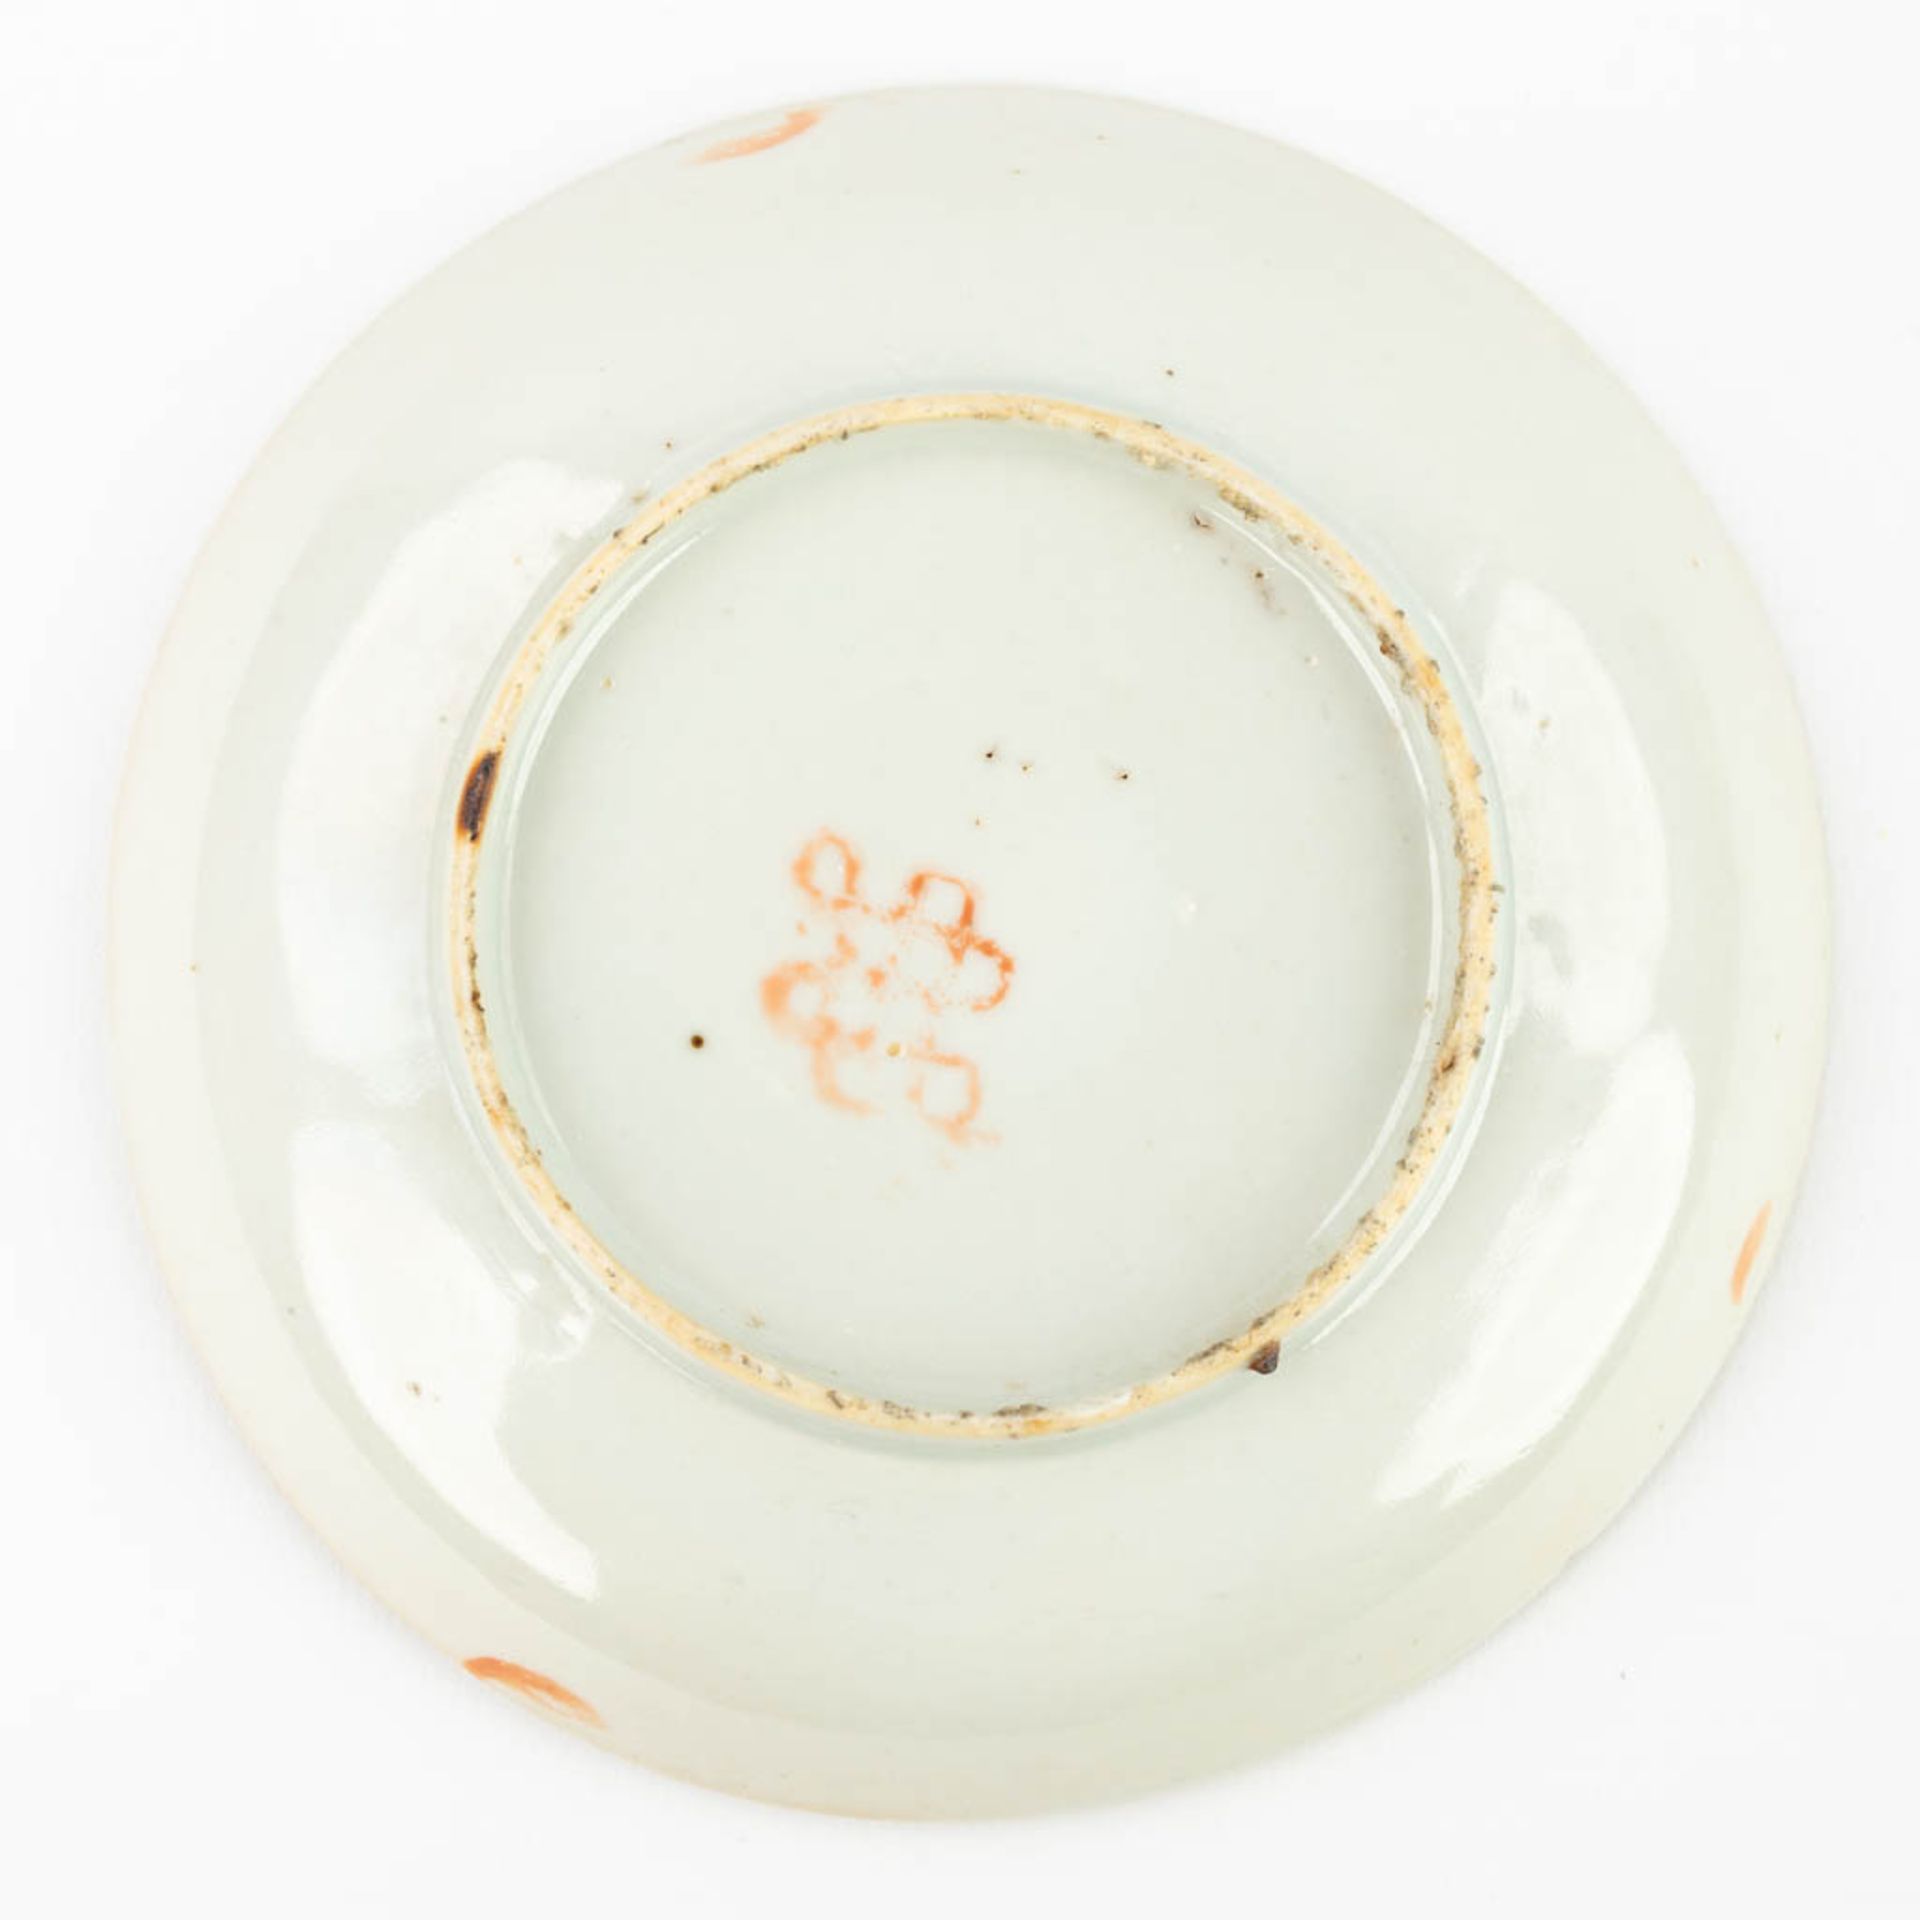 A set of 4 Chinese plates made of porcelain and decorated with peaches and flowers. (13,7 cm) - Image 3 of 14